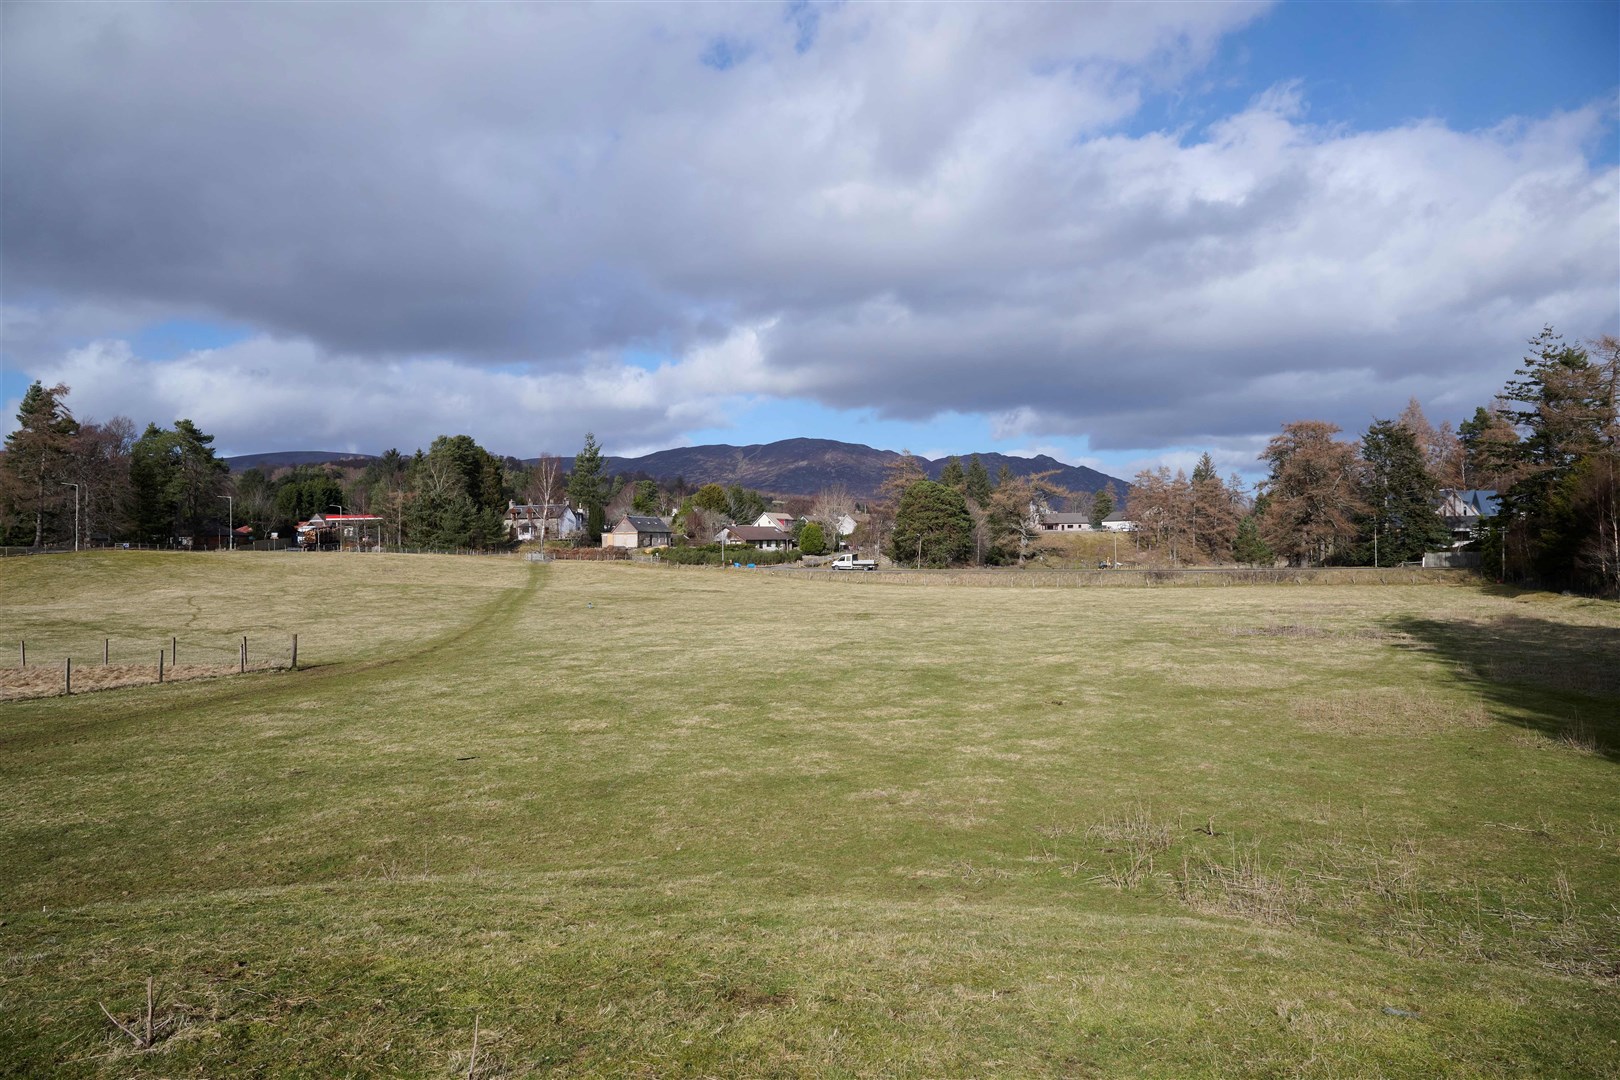 Think of a name! That's the challenge for the children of Newtonmore Primary School as they view the site of their village's new homes development.